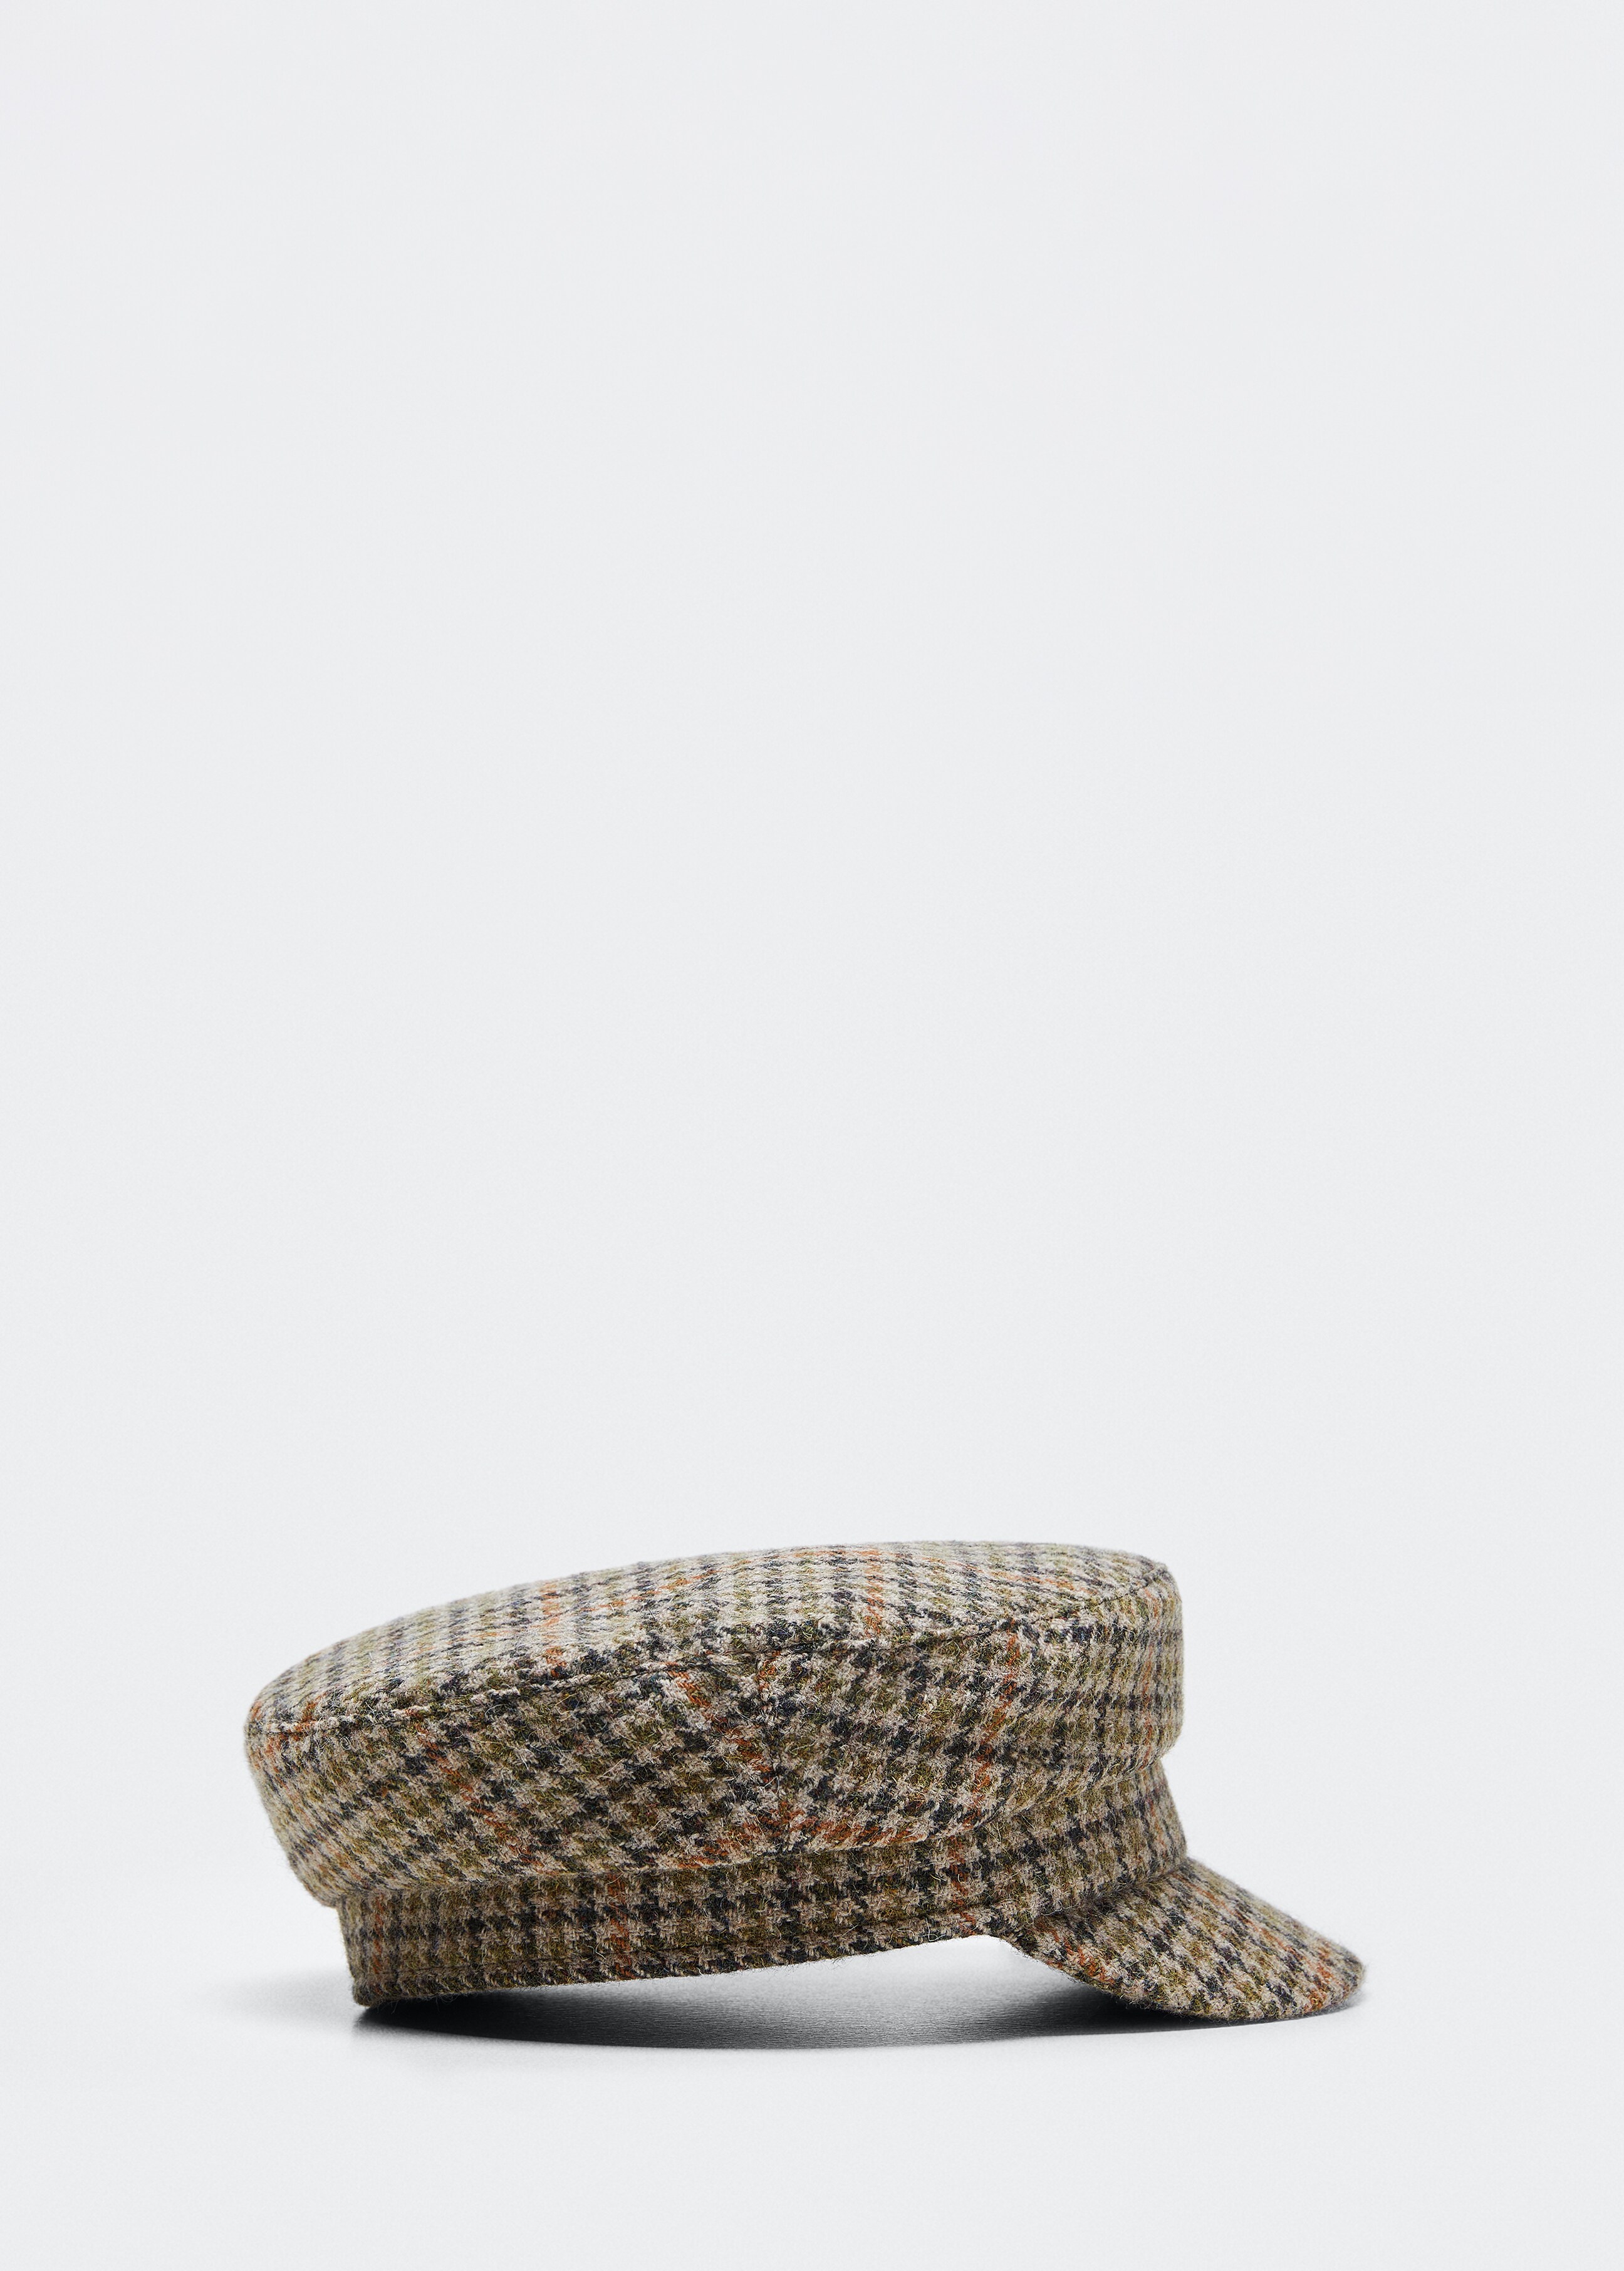 Houndstooth beret - Article without model